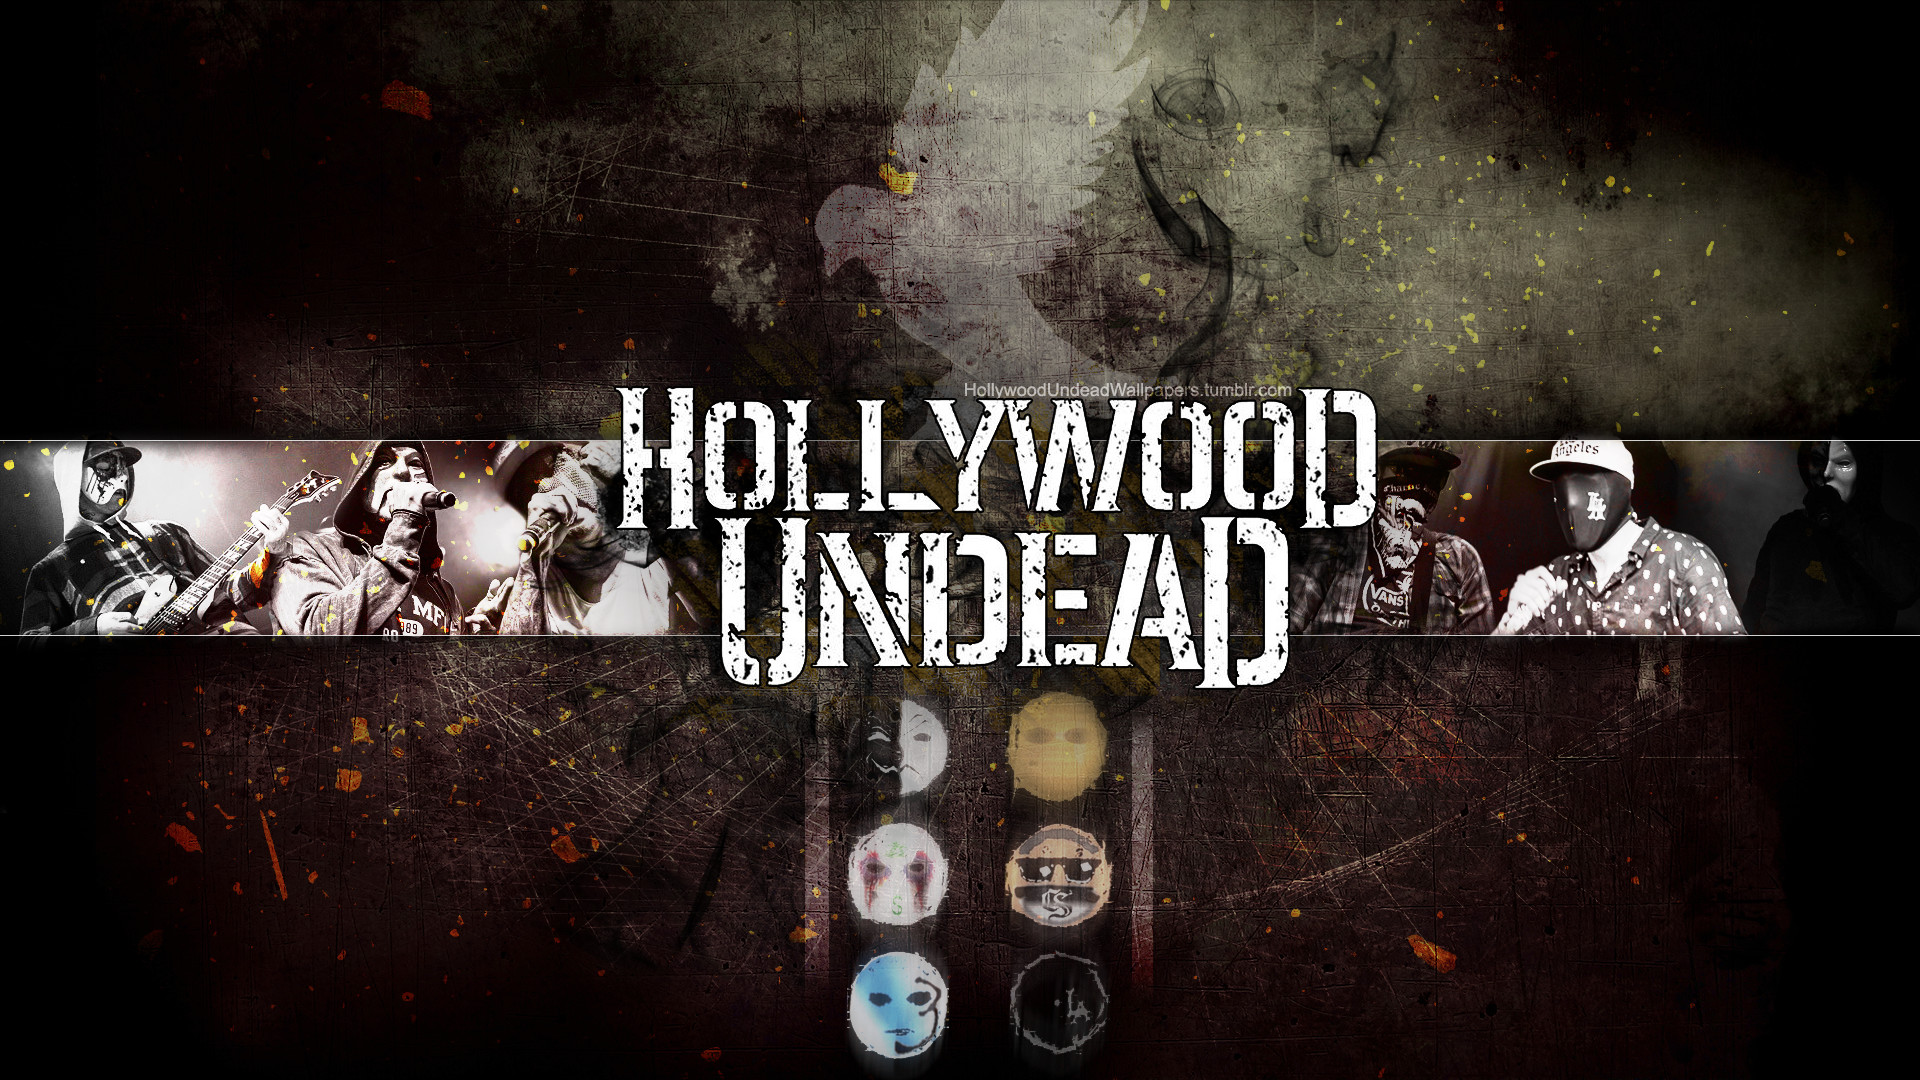 1920x1080 Hollywood Undead - DotD Wallpaper w/ Mask Icons by emirulug